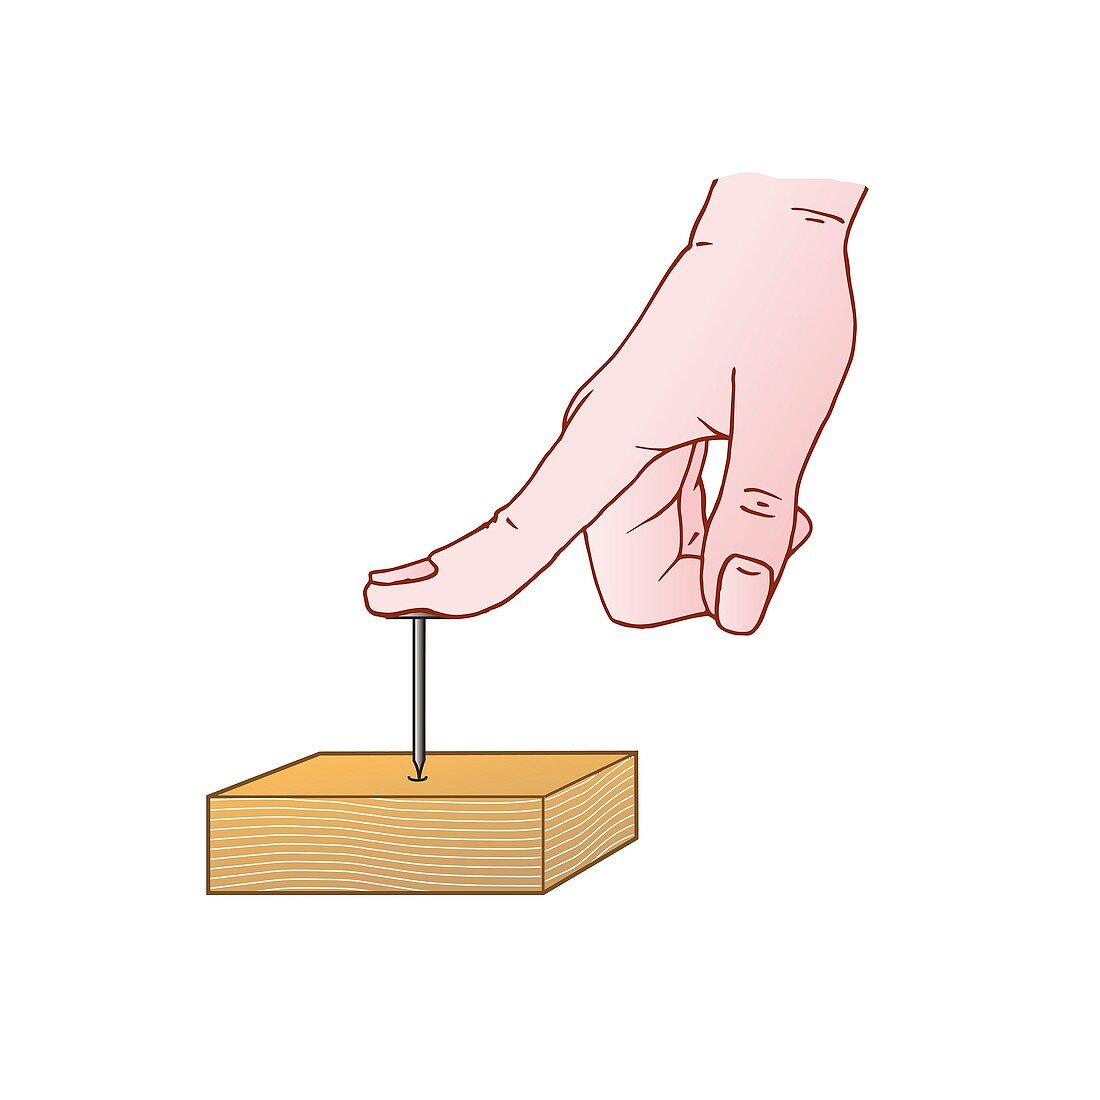 Pressure exerted by finger pushing a nail into wood, illustr